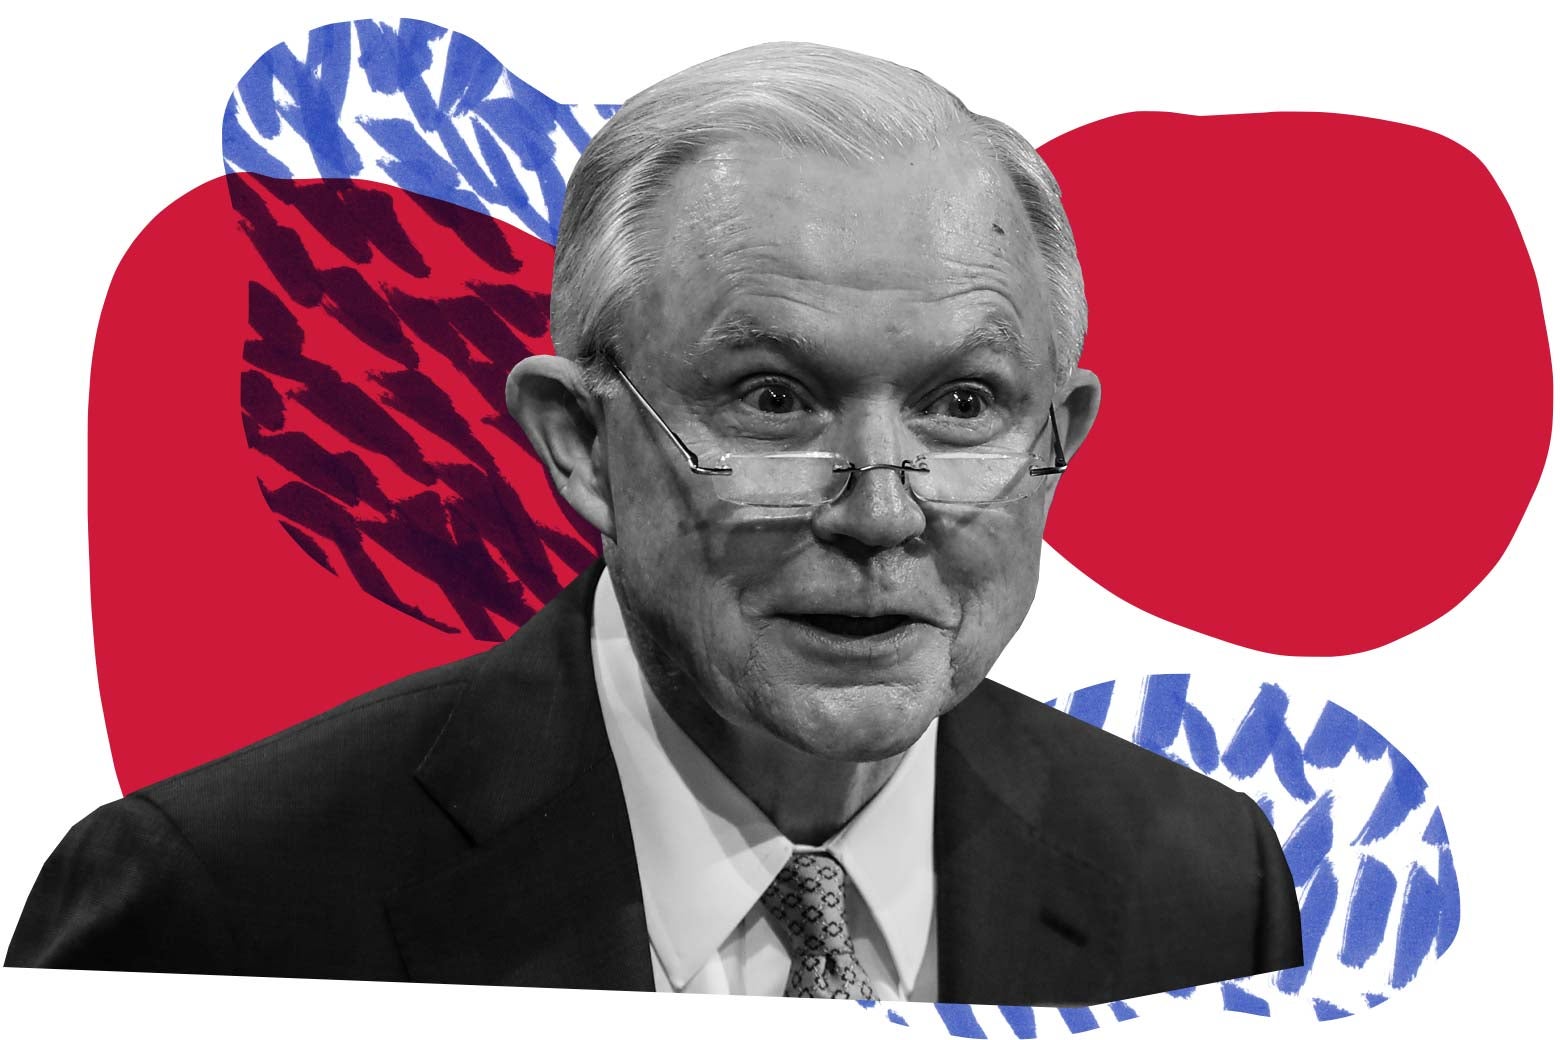 Jeff Sessions.